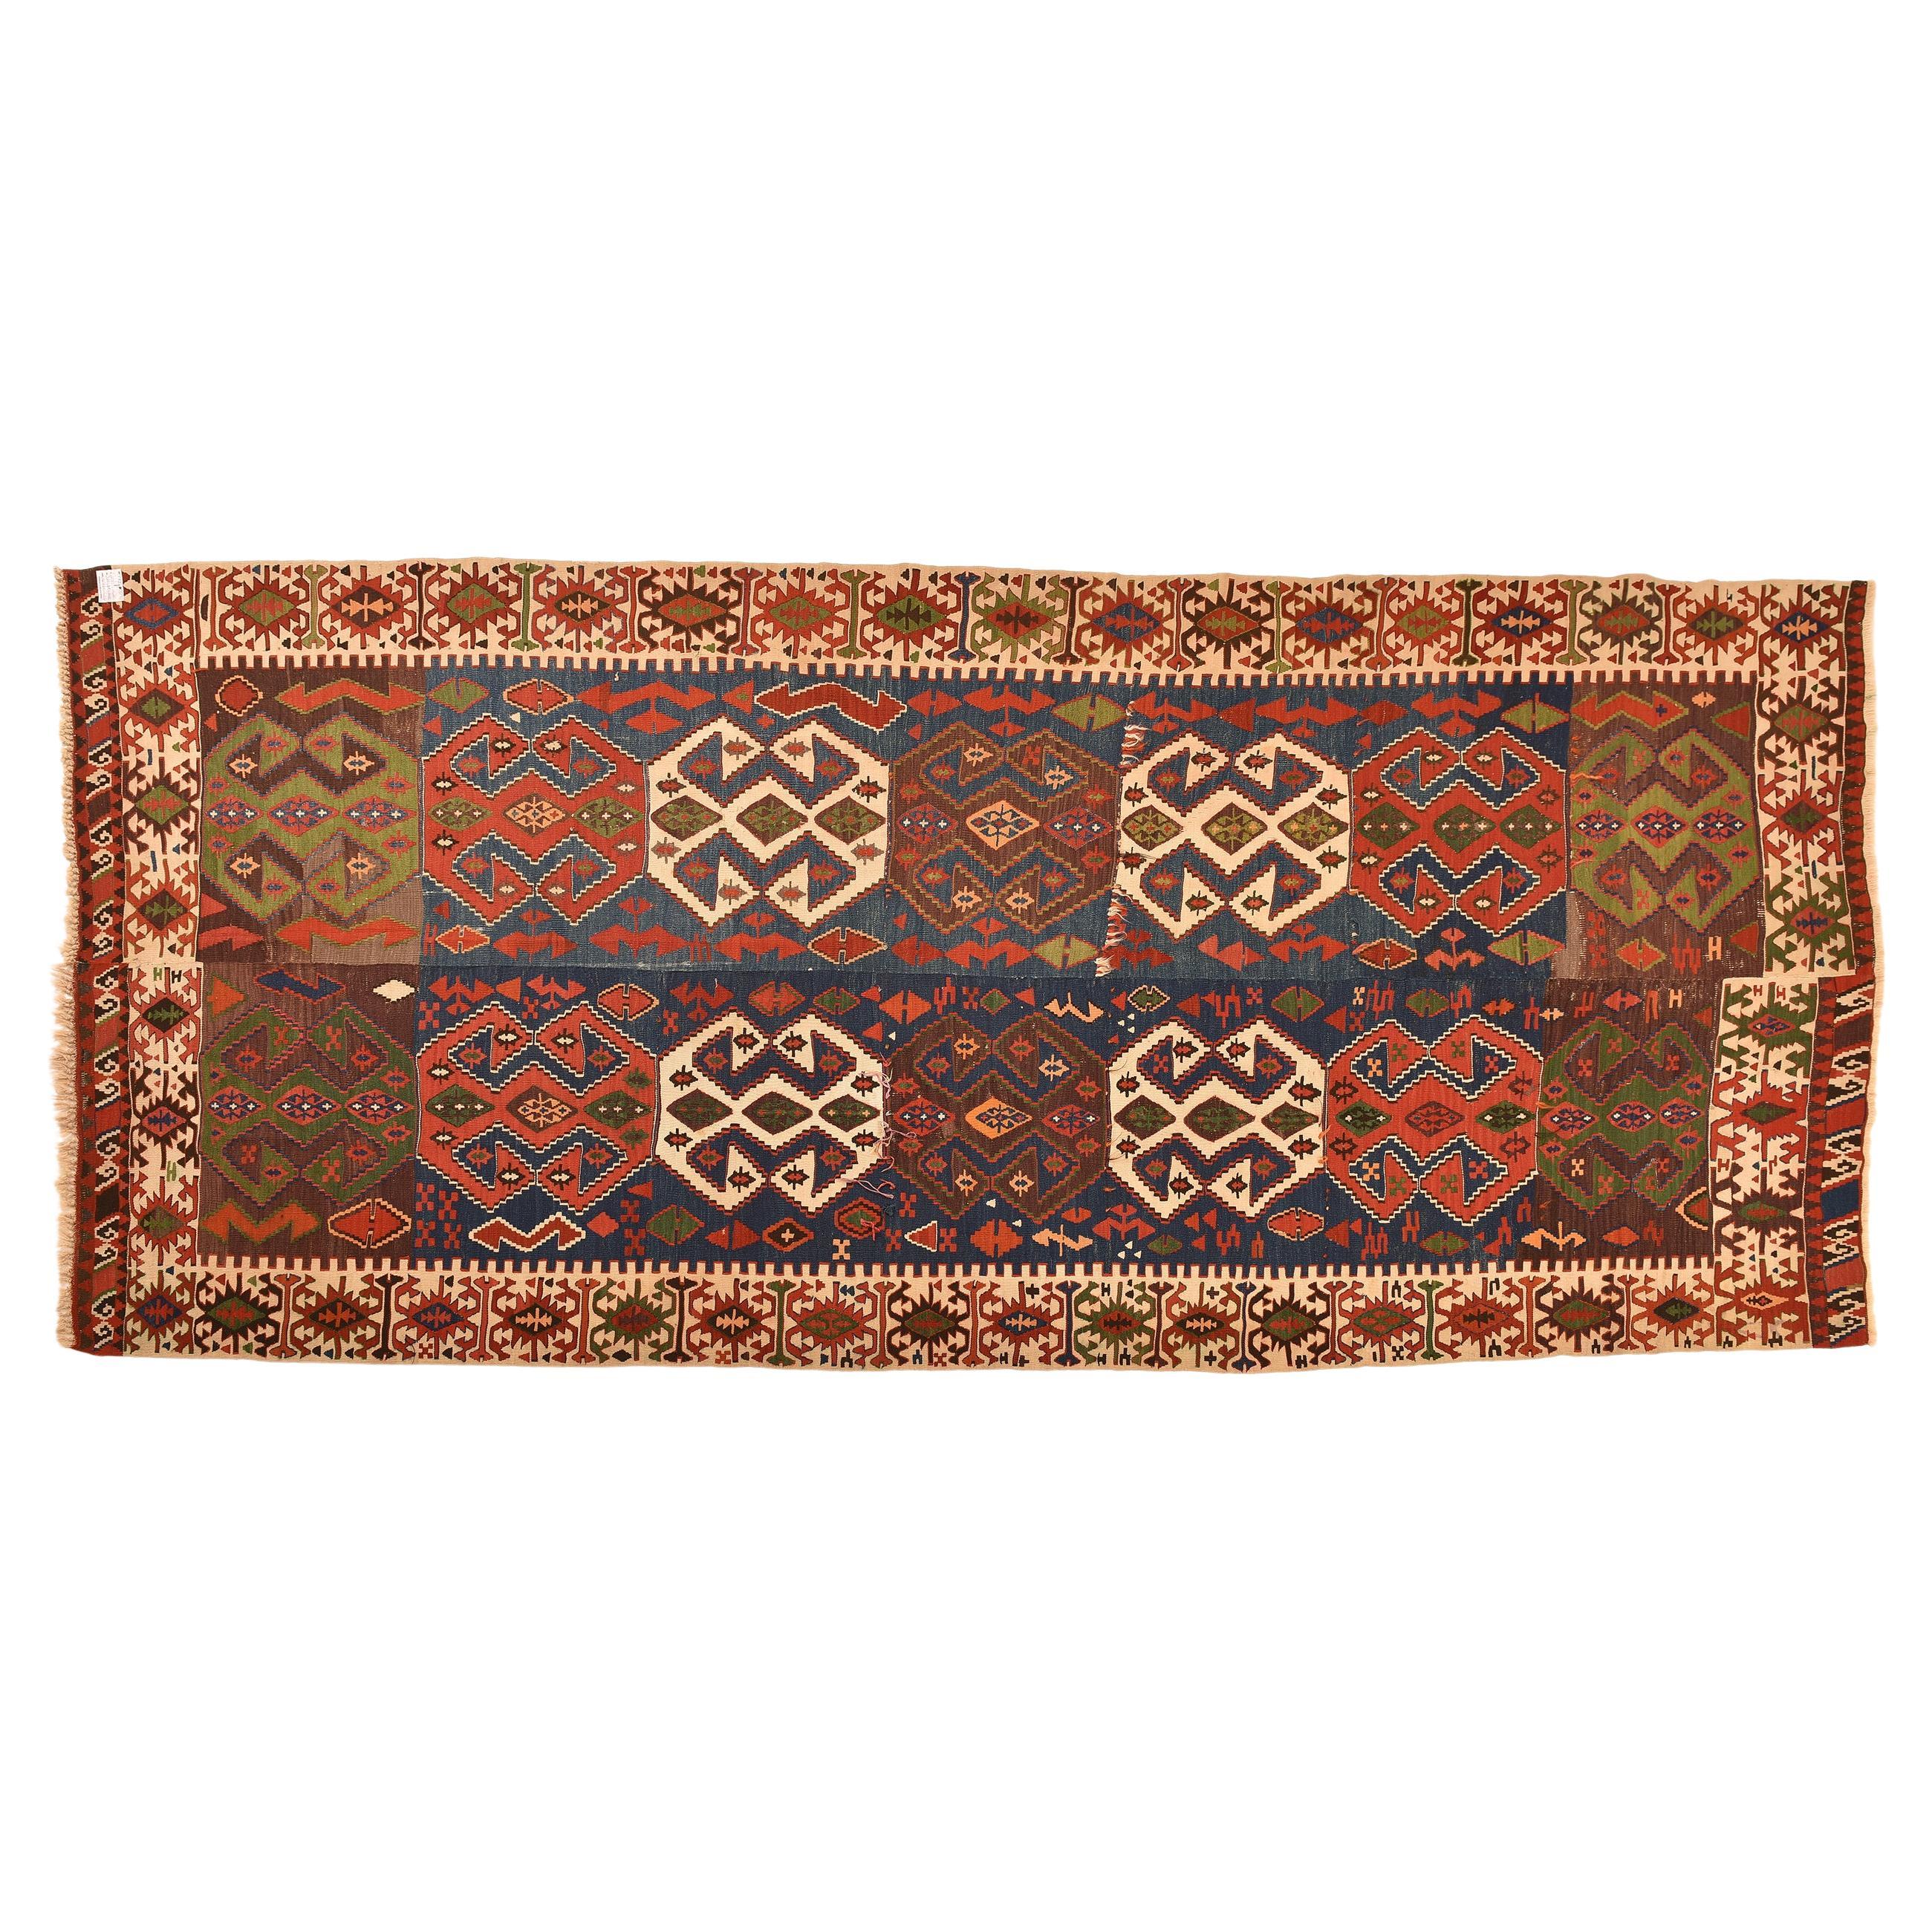 nr. 1091 -  Beautiful sized Turkish kilim, one of the most famous oriental artifacts.
Excellent workmanship and beautiful colors, including the rare green.
Right setting in the leaving room.